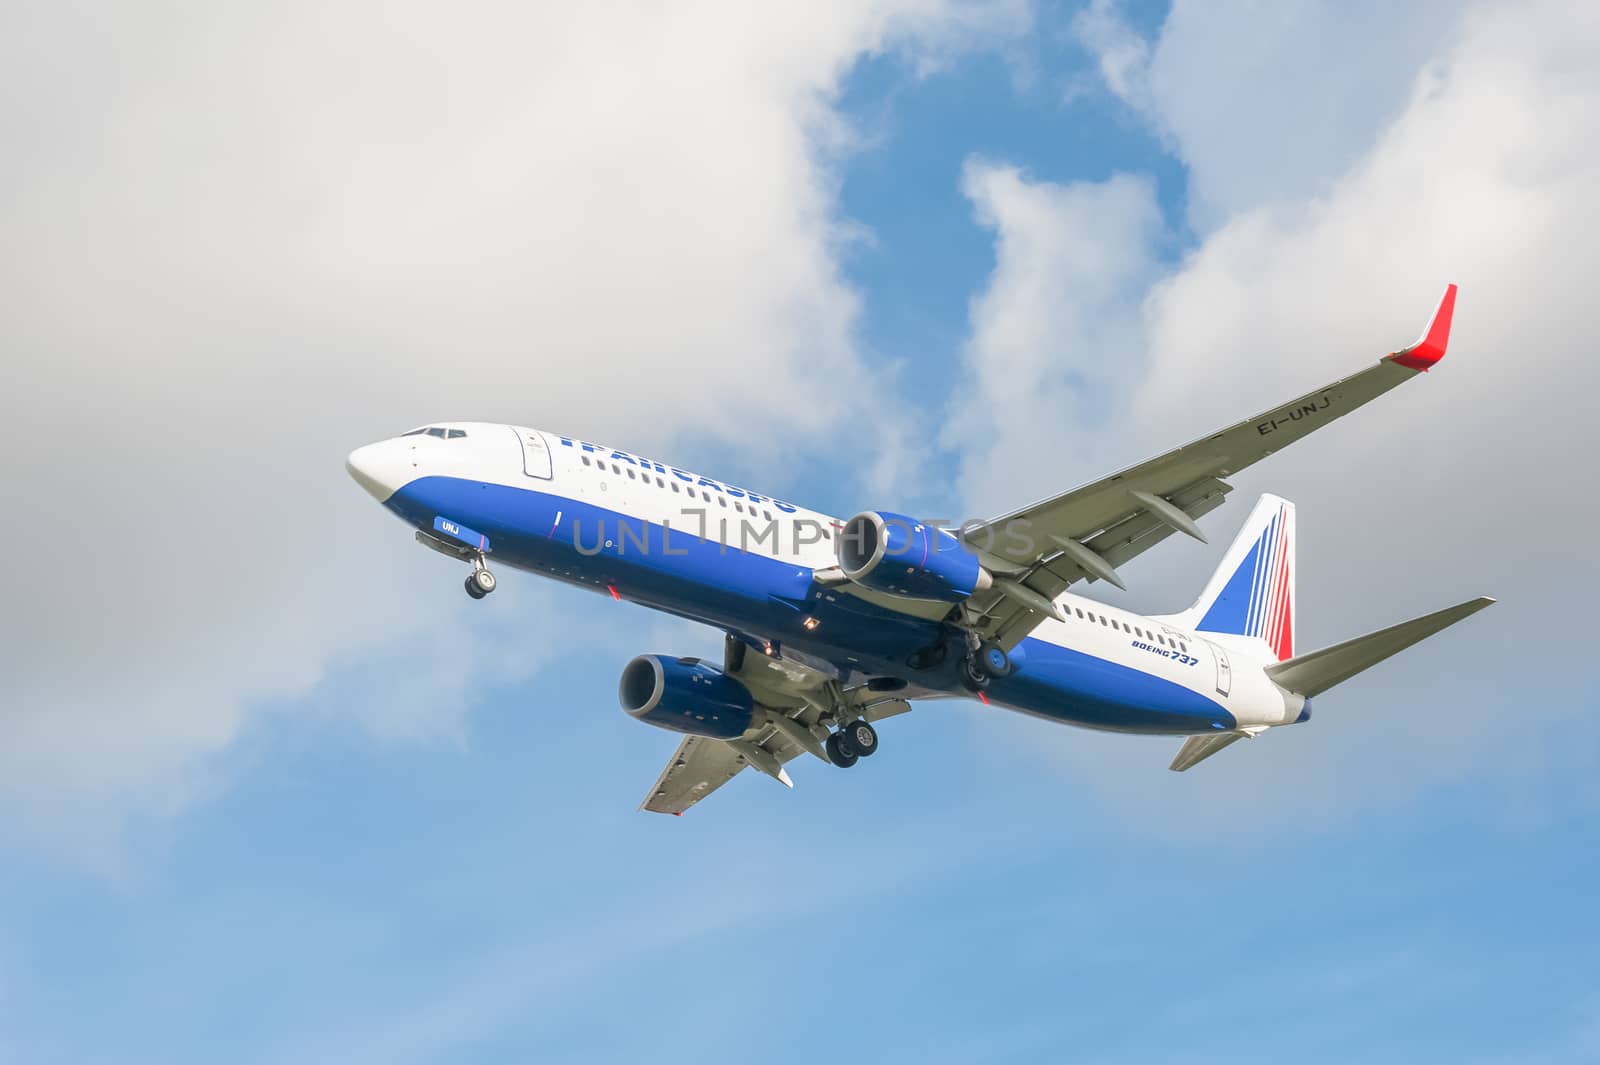 London, Heathrow, UK - October 30, 2012: Operated by Russian Federation airline Transaero, a Boeing 737 on landing approach to London Heathrow Airport, UK